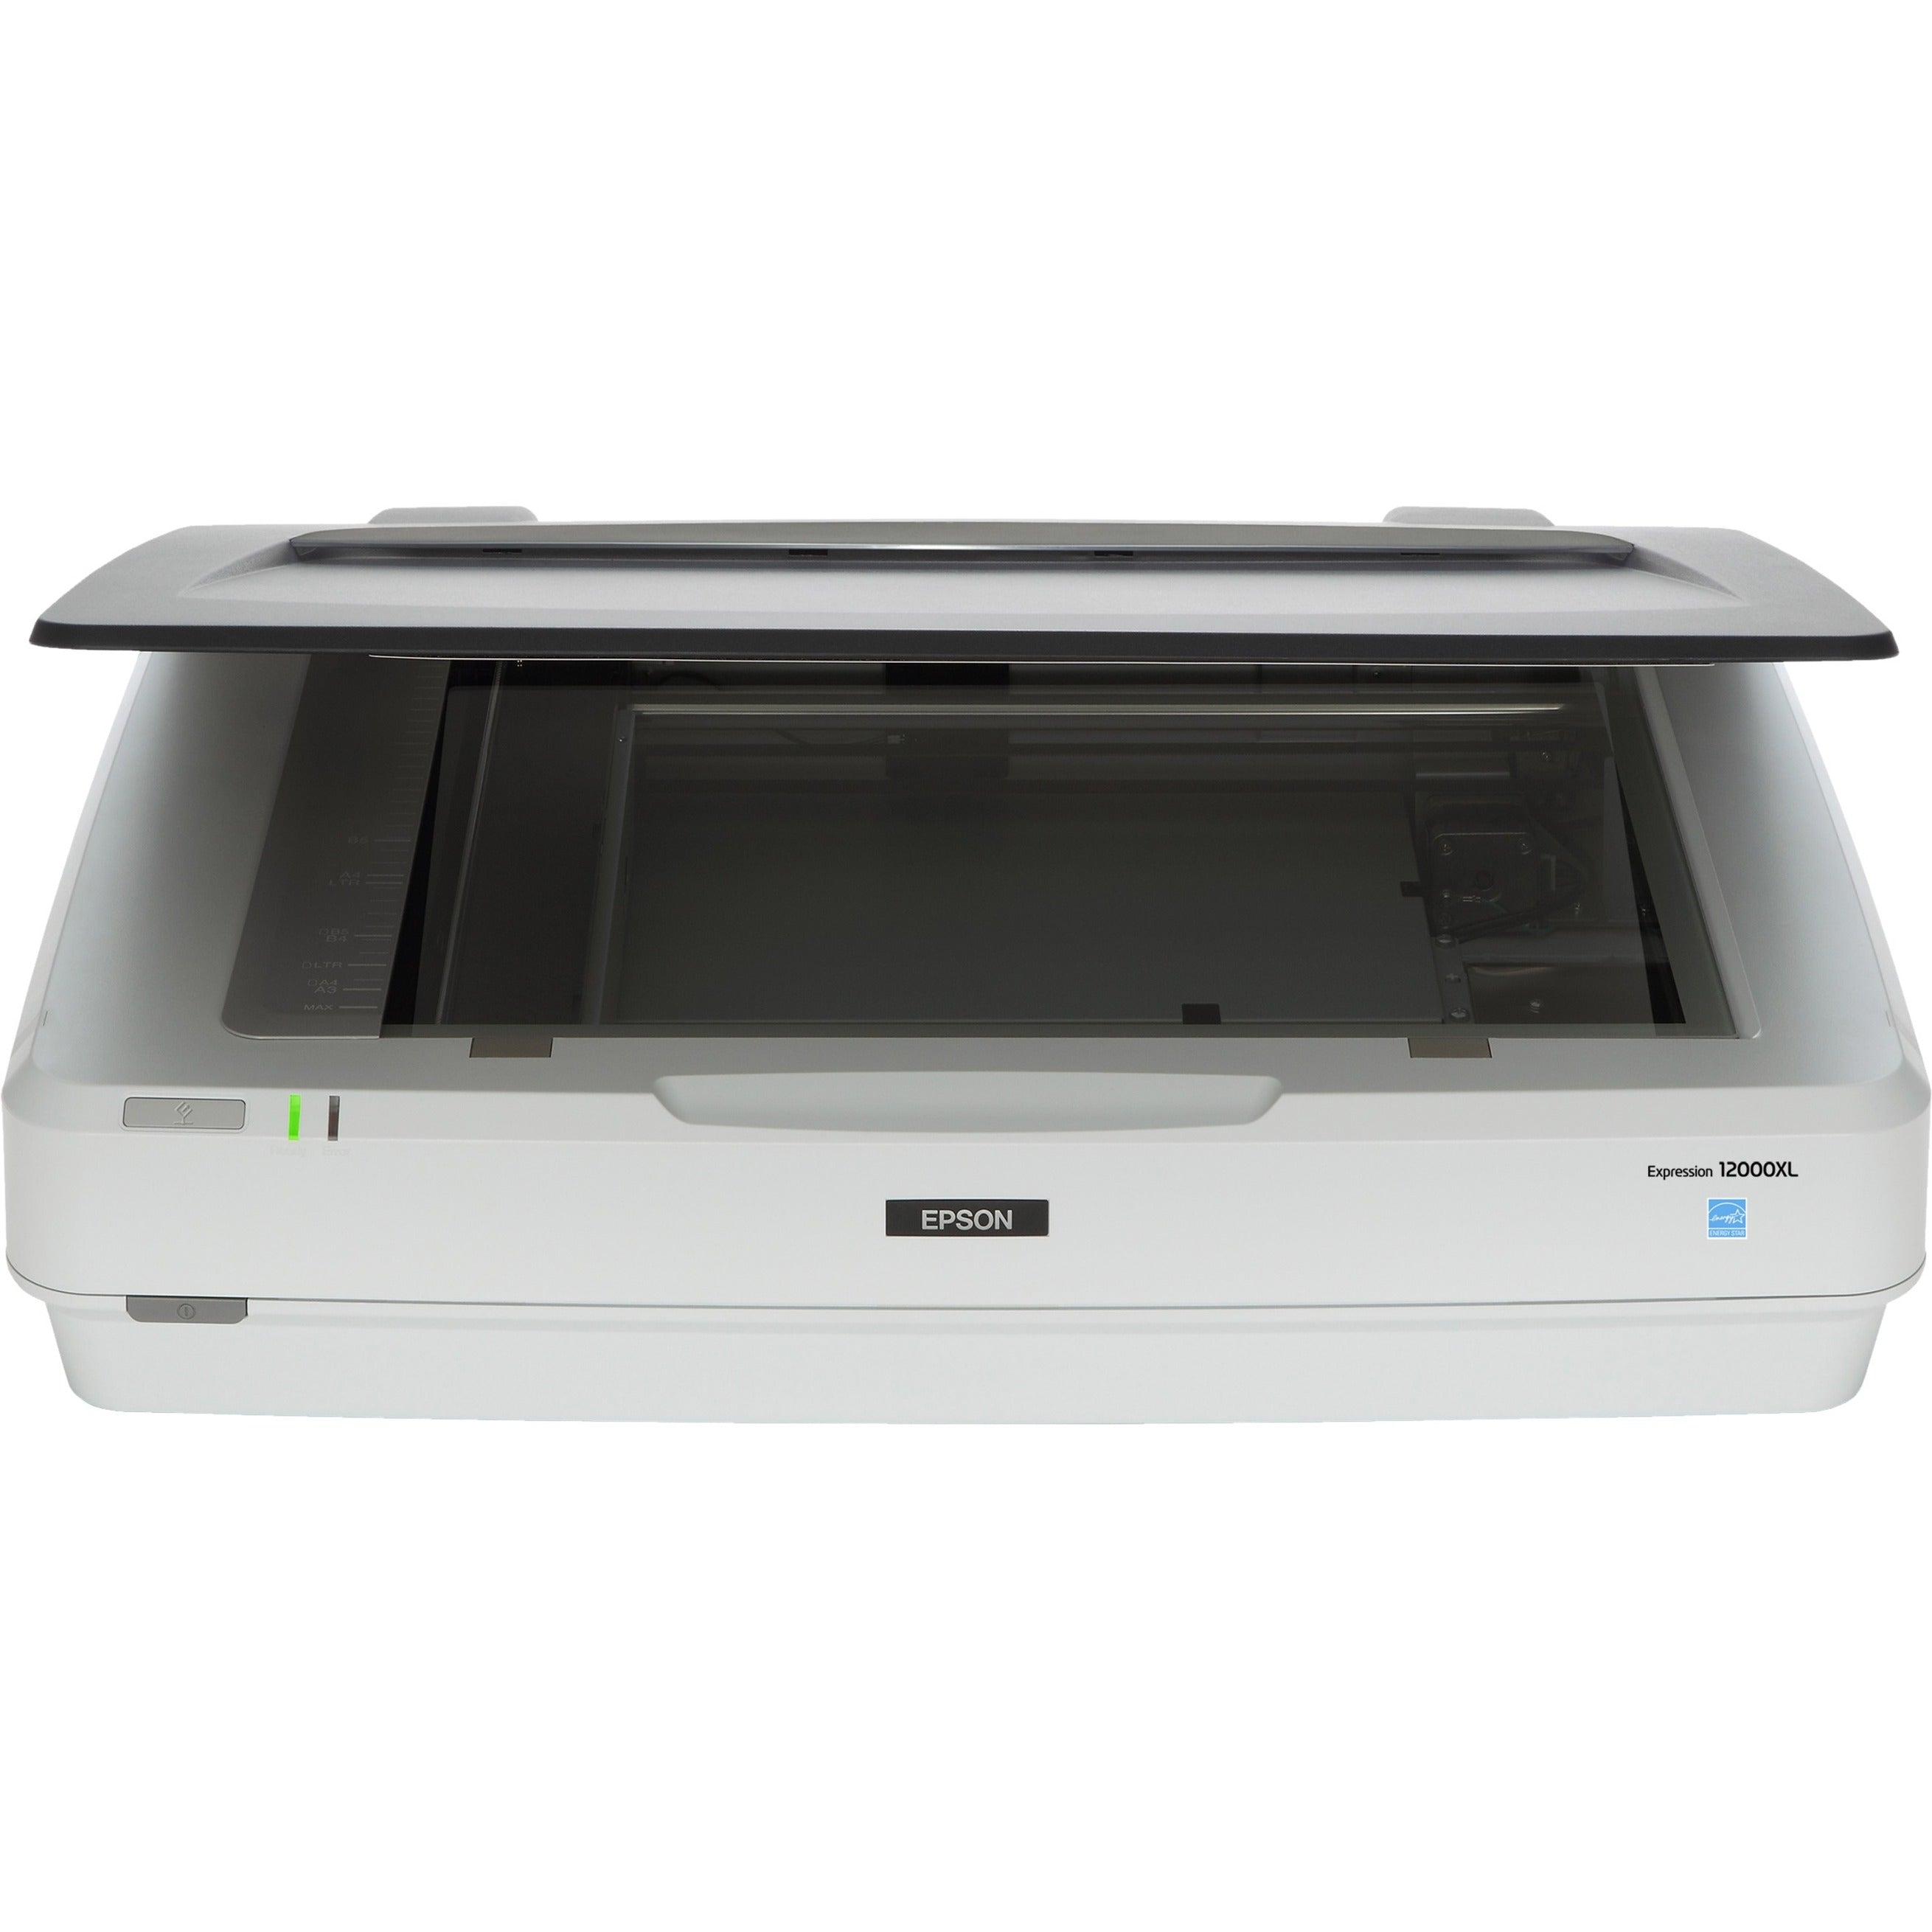 Epson Expression 12000XL-GA Graphic Arts Scanner - High Resolution Scanning [Discontinued]